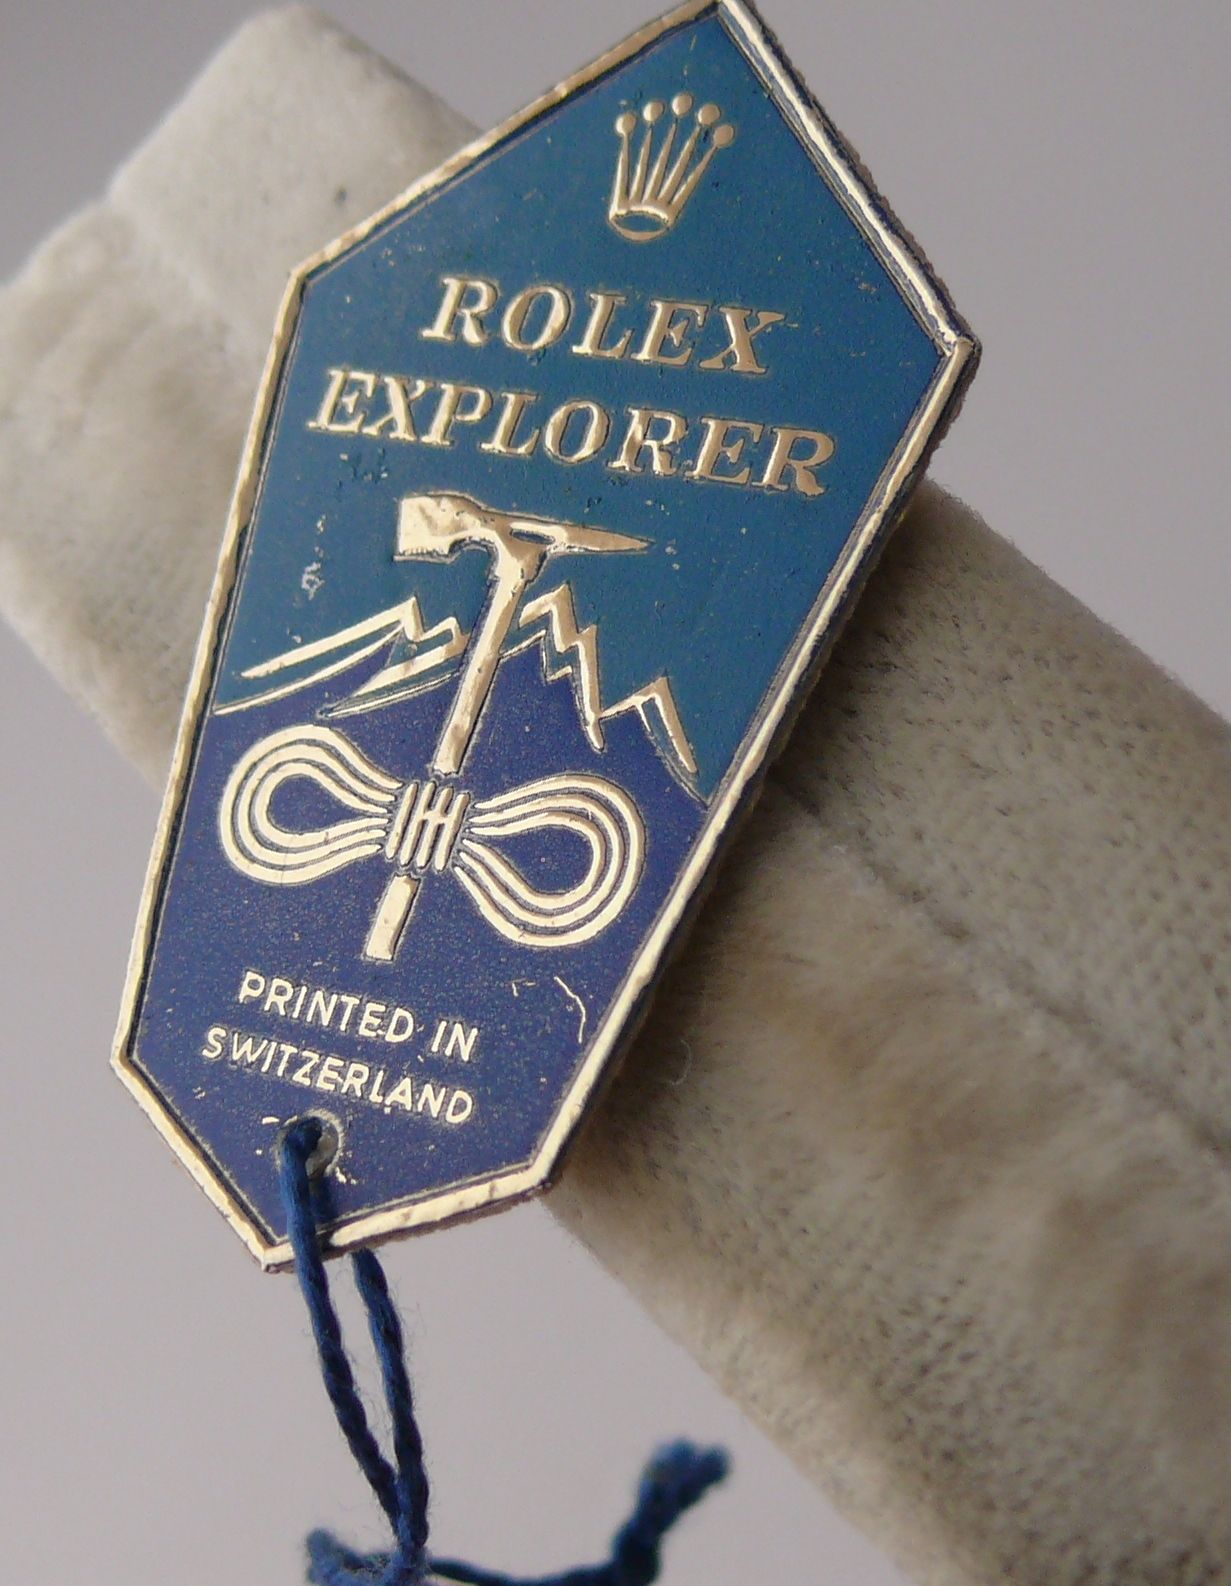 RARE Vintage Gents Rolex Explorer Swing Tags from the 1950s suitable for various early gilt models - Image 3 of 4